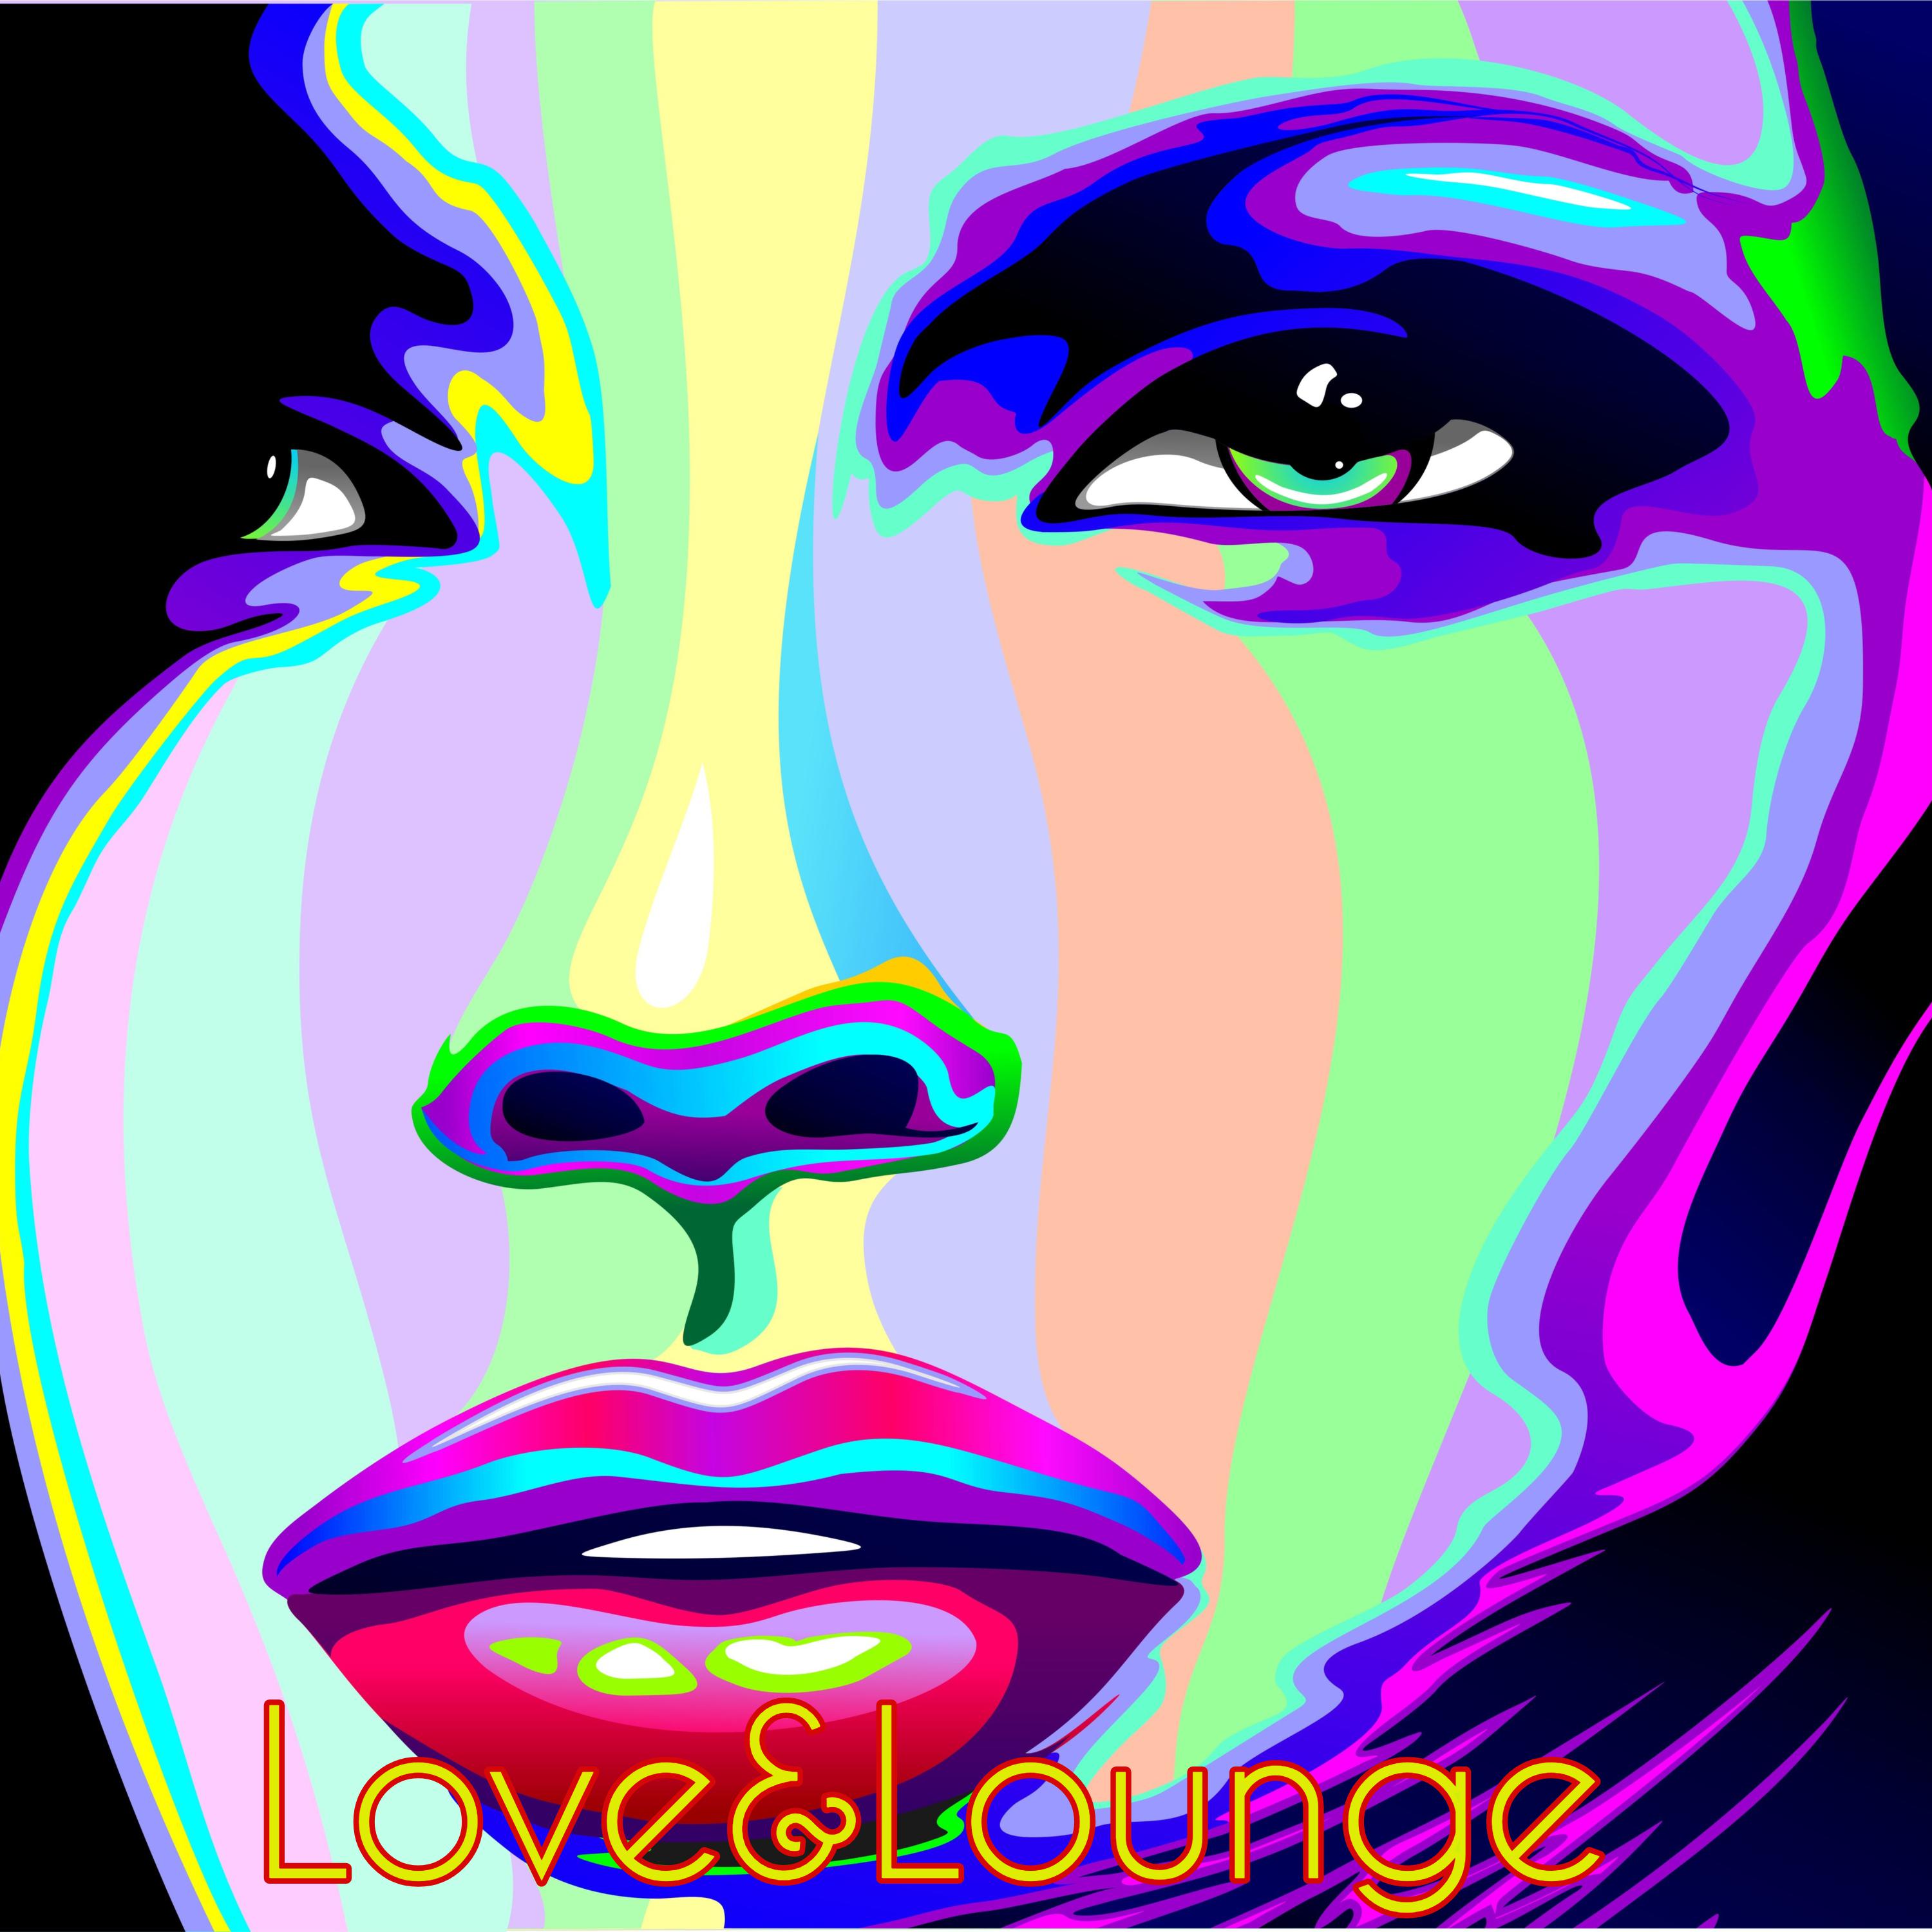 Love&Lounge – New Romantic Lounge Music for Intimacy, Private Party, Sexy Dance for Hot Party